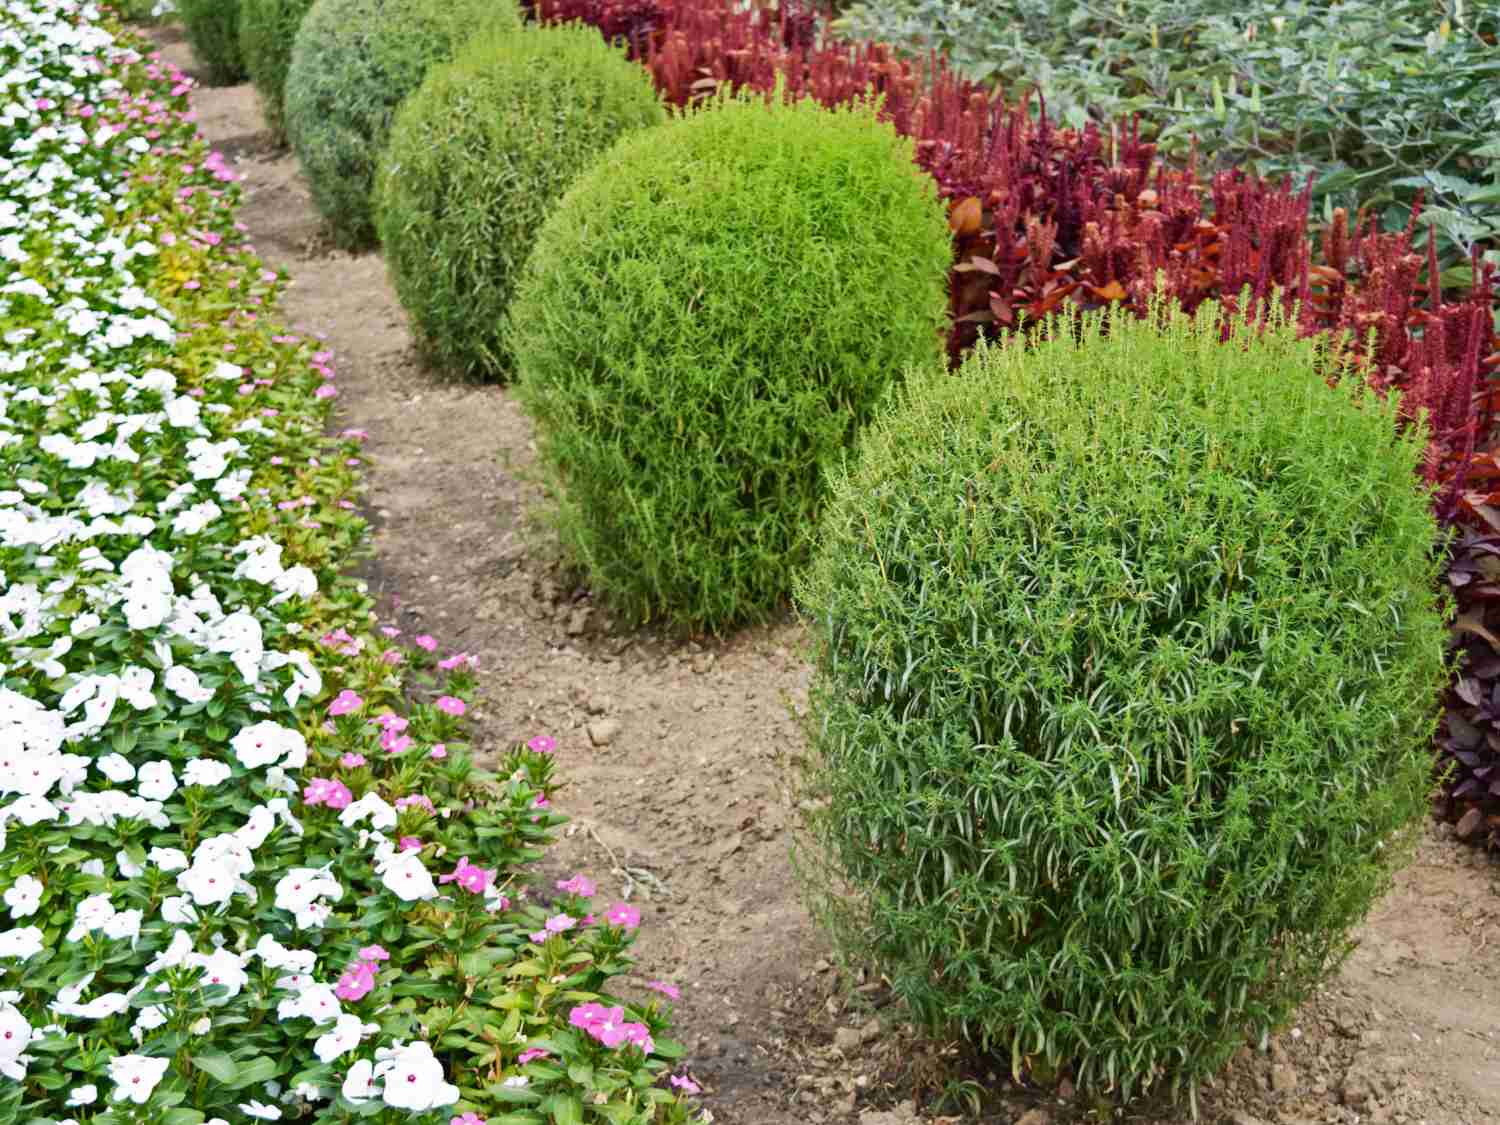 Hedge protecting plants from diseases